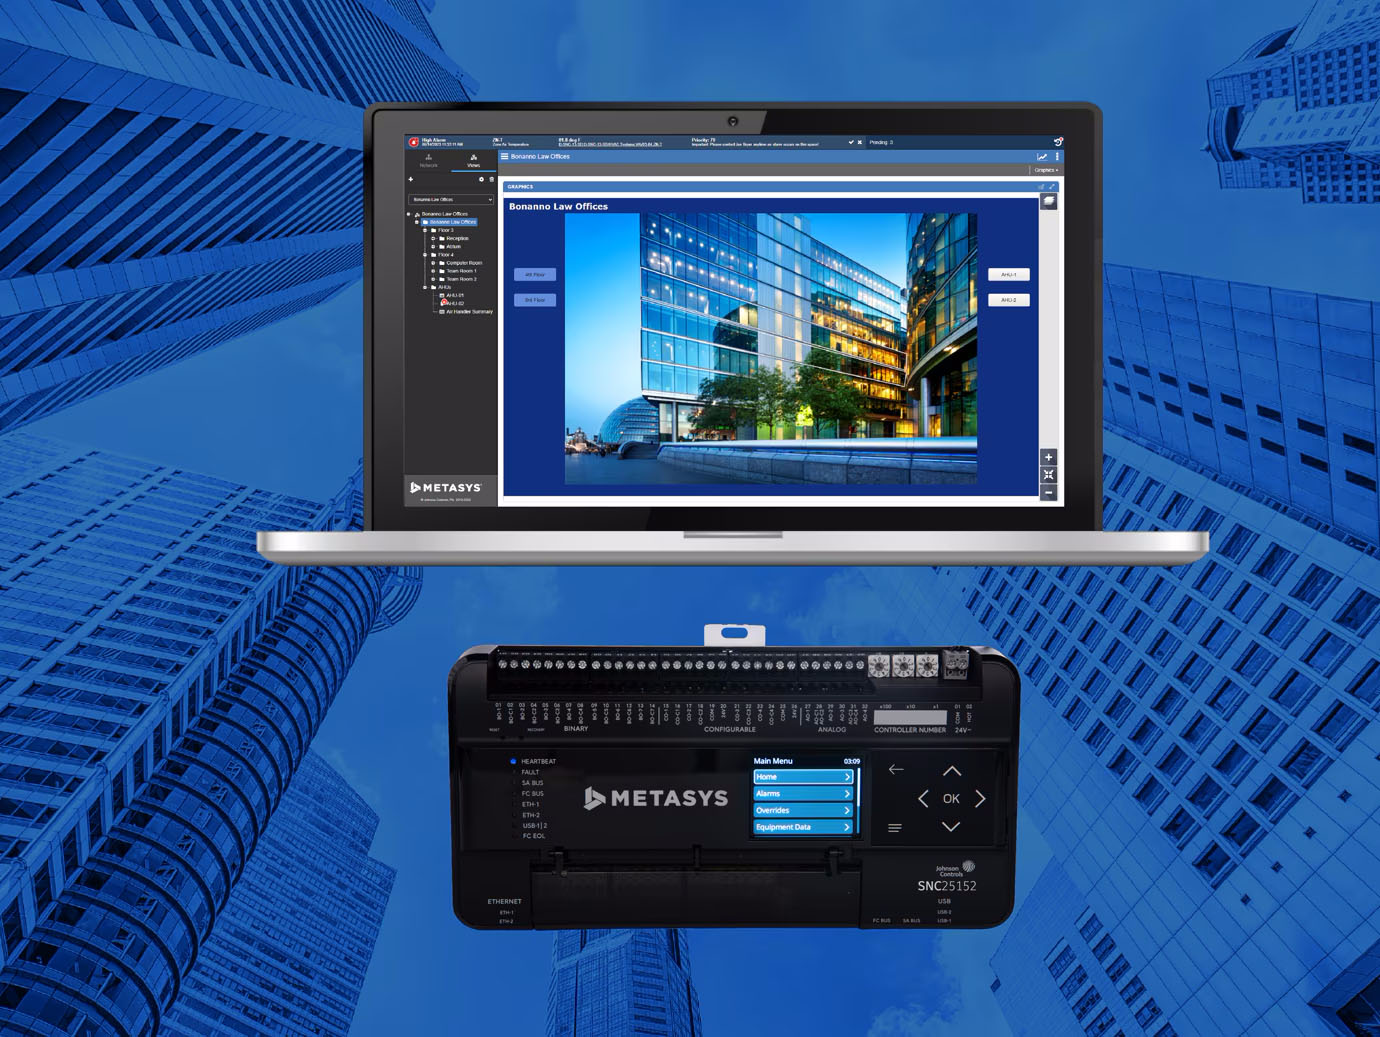 A laptop screen displaying the Metasys interface alongside a Metasys controller overlaid on an image of high-rise buildings